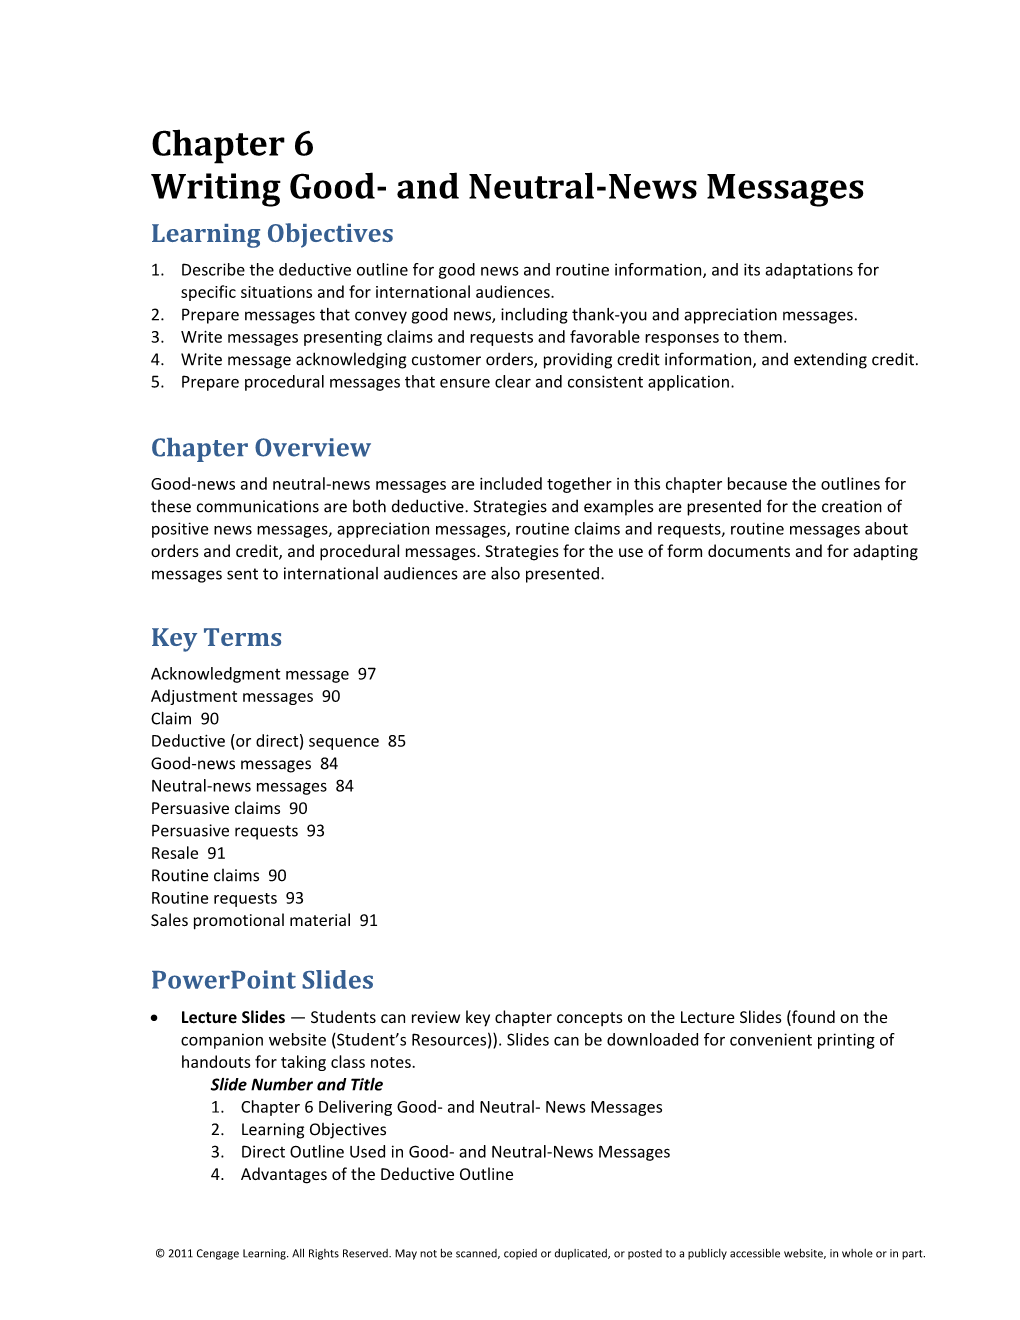 Chapter 6 Writing Good and Neutral-News Messages